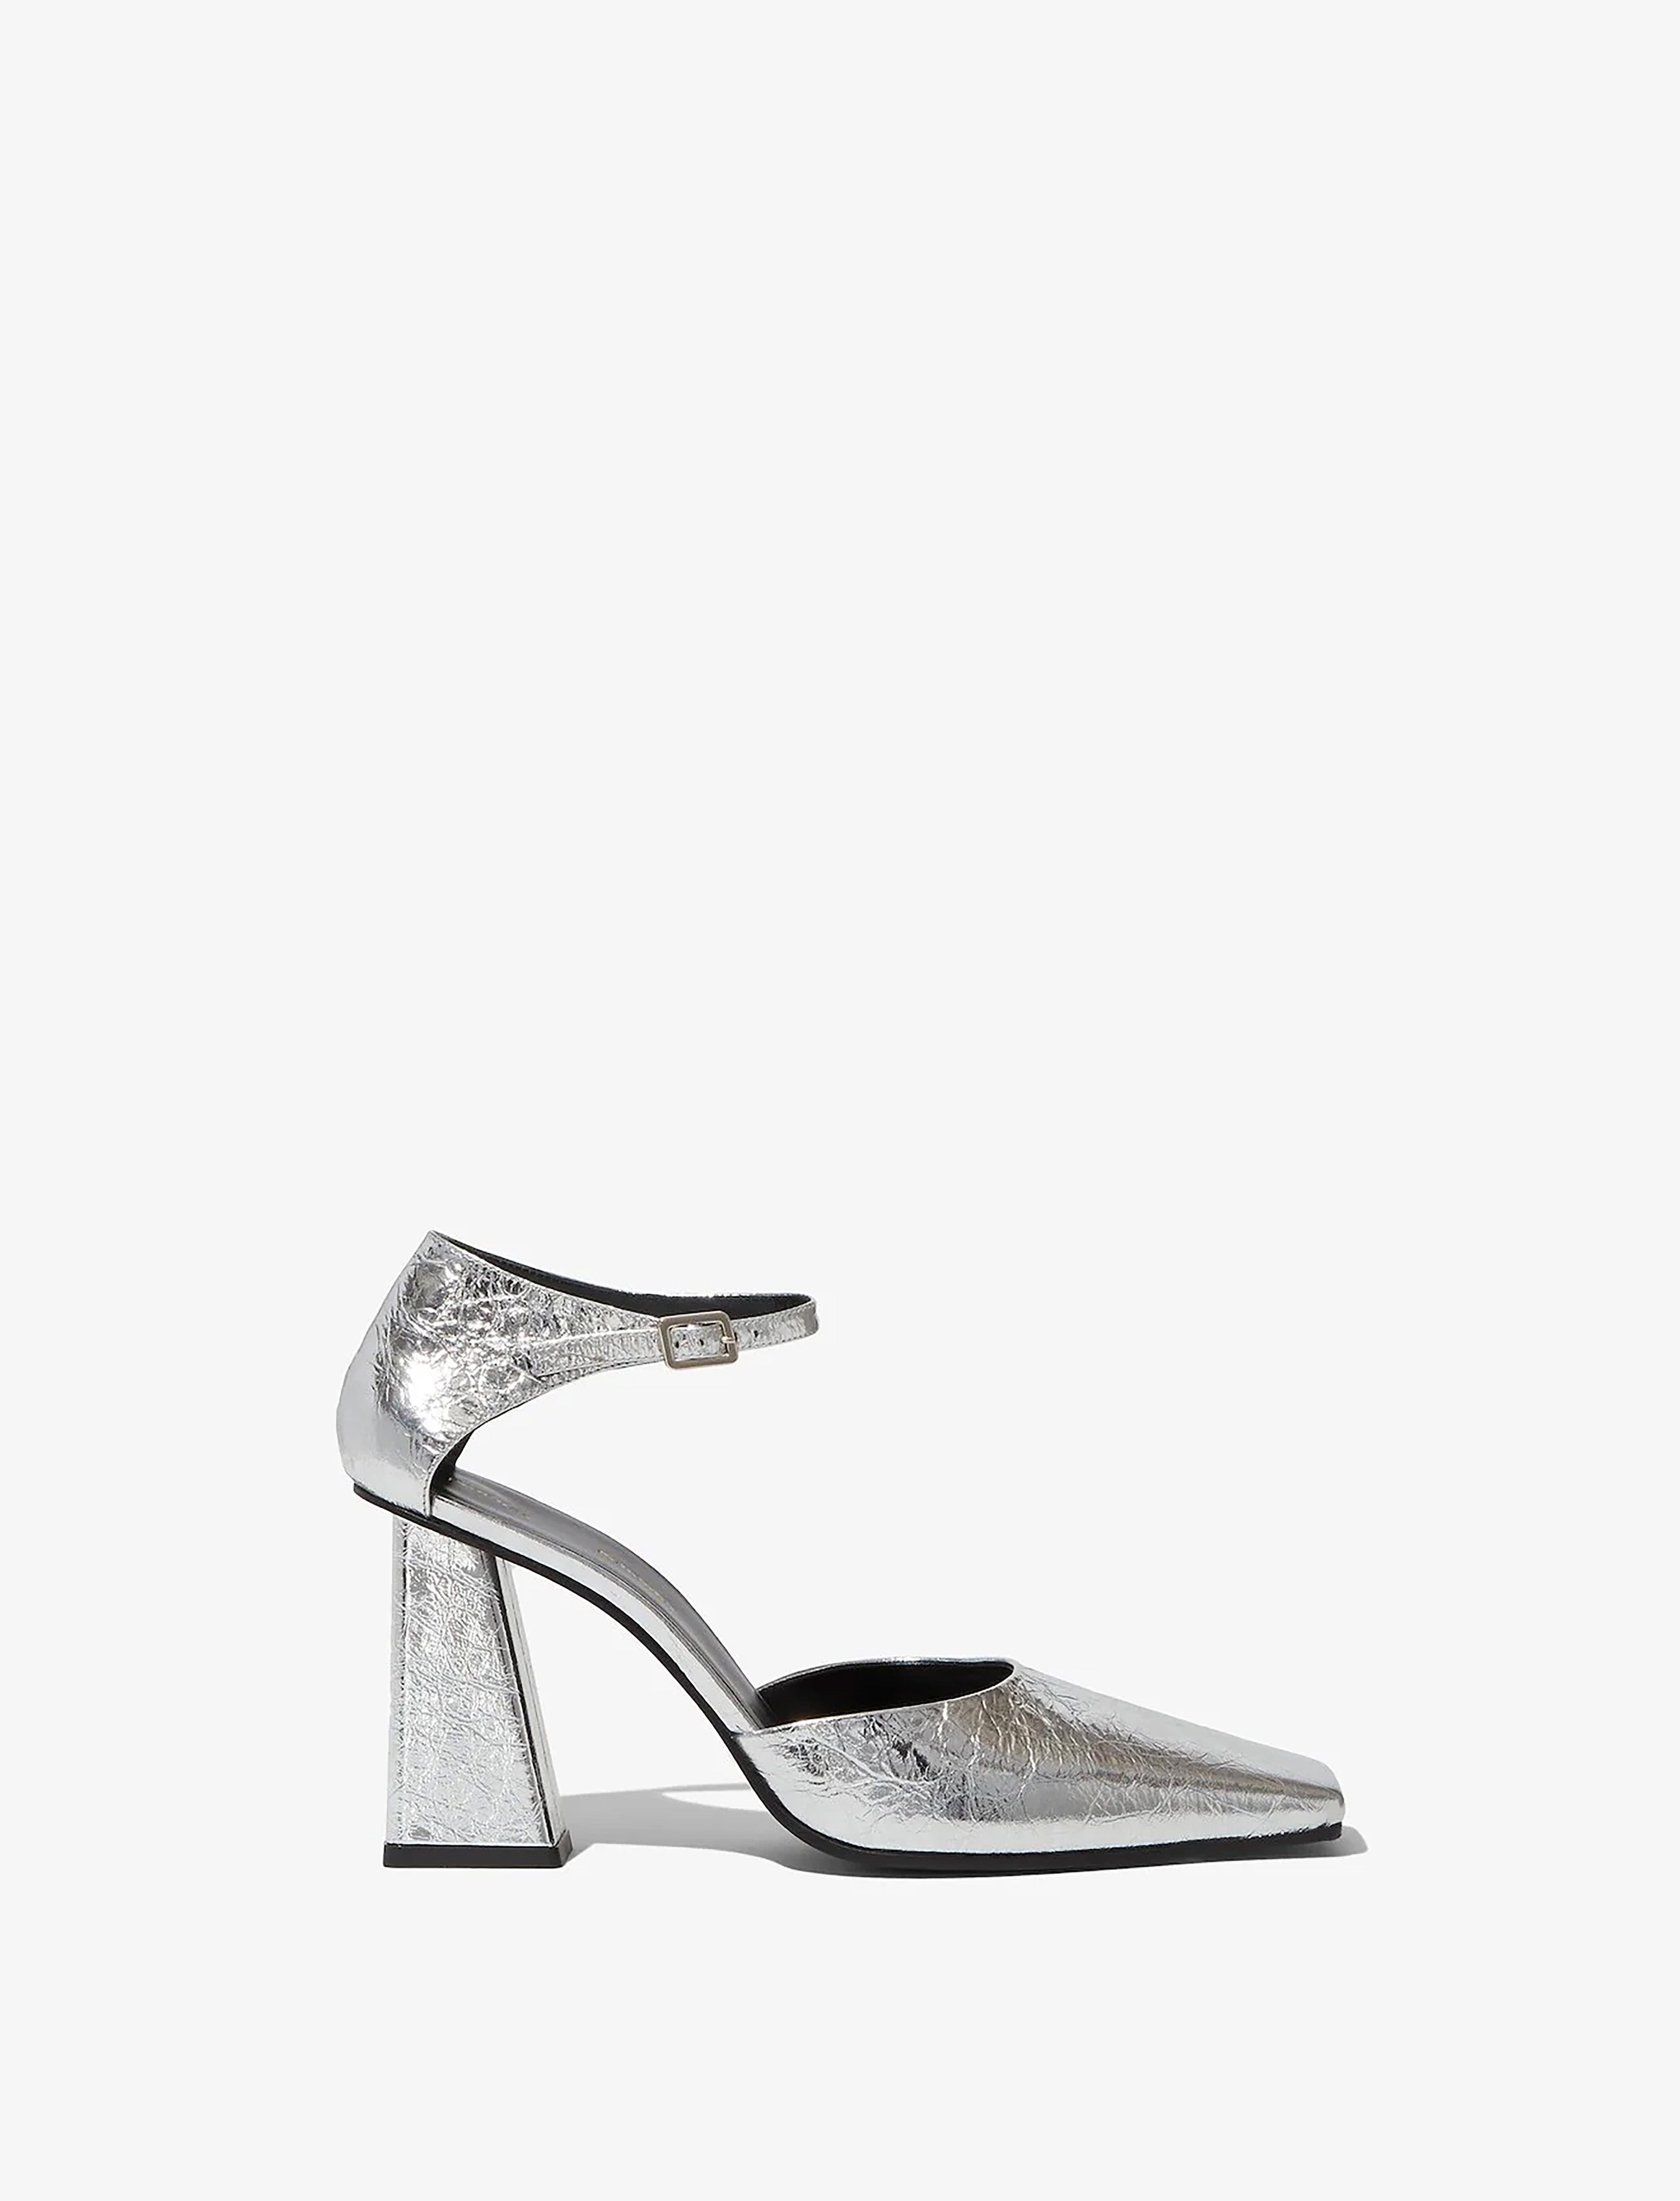 Quad Ankle Strap Pumps in Crinkled Metallic – Proenza Schouler